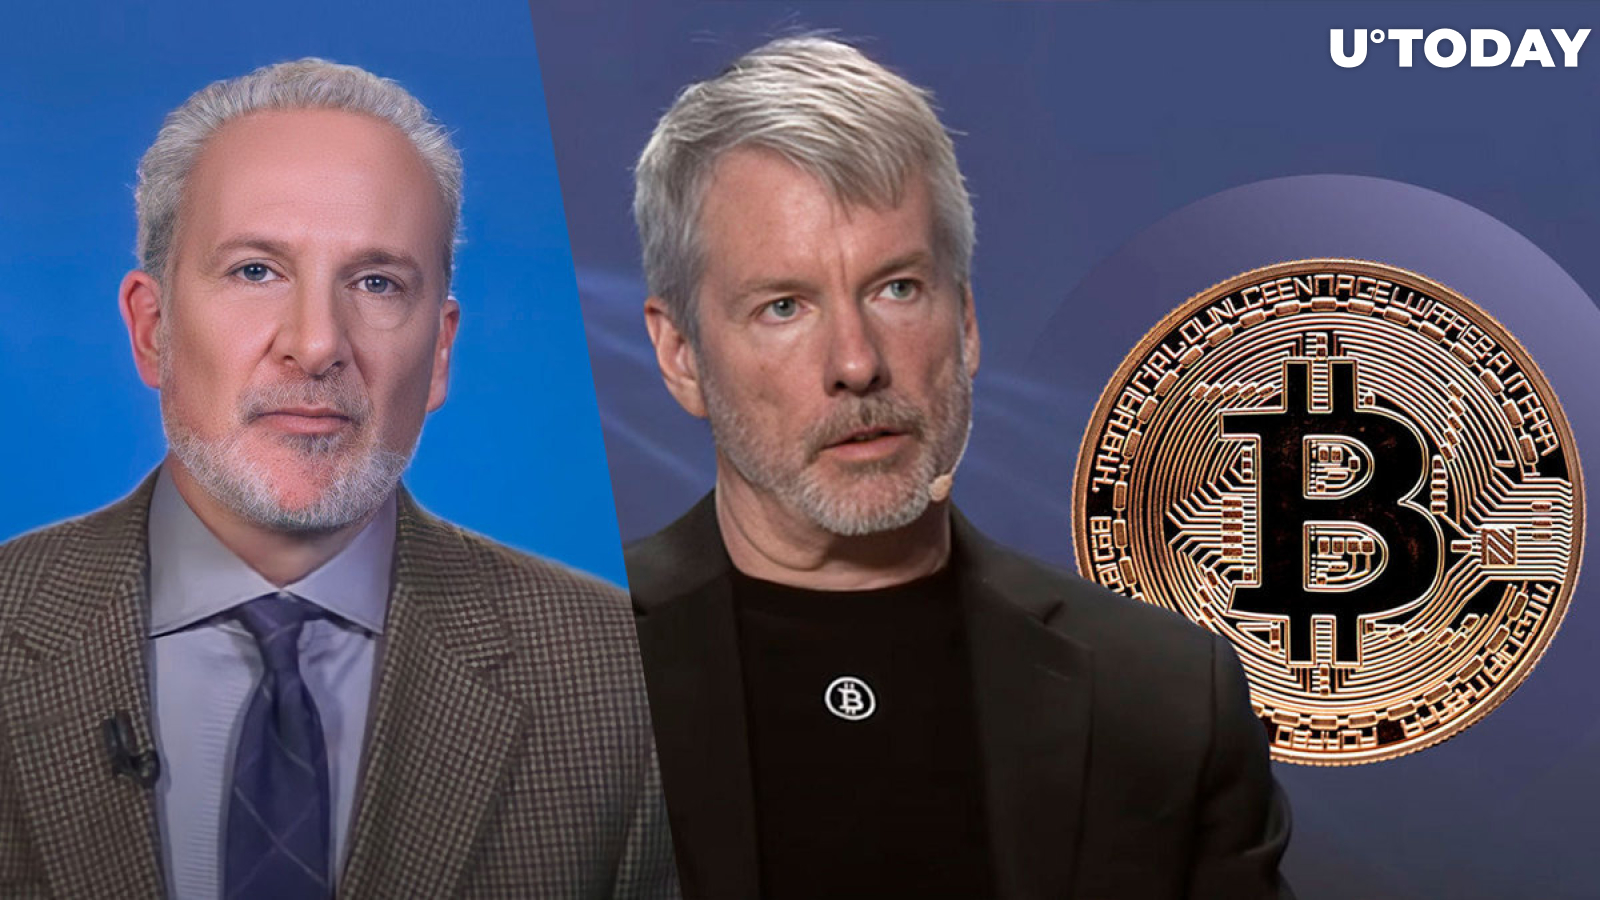 Bitcoin and MicroStrategy on Brink of Collapse? Peter Schiff Sounds Alarm